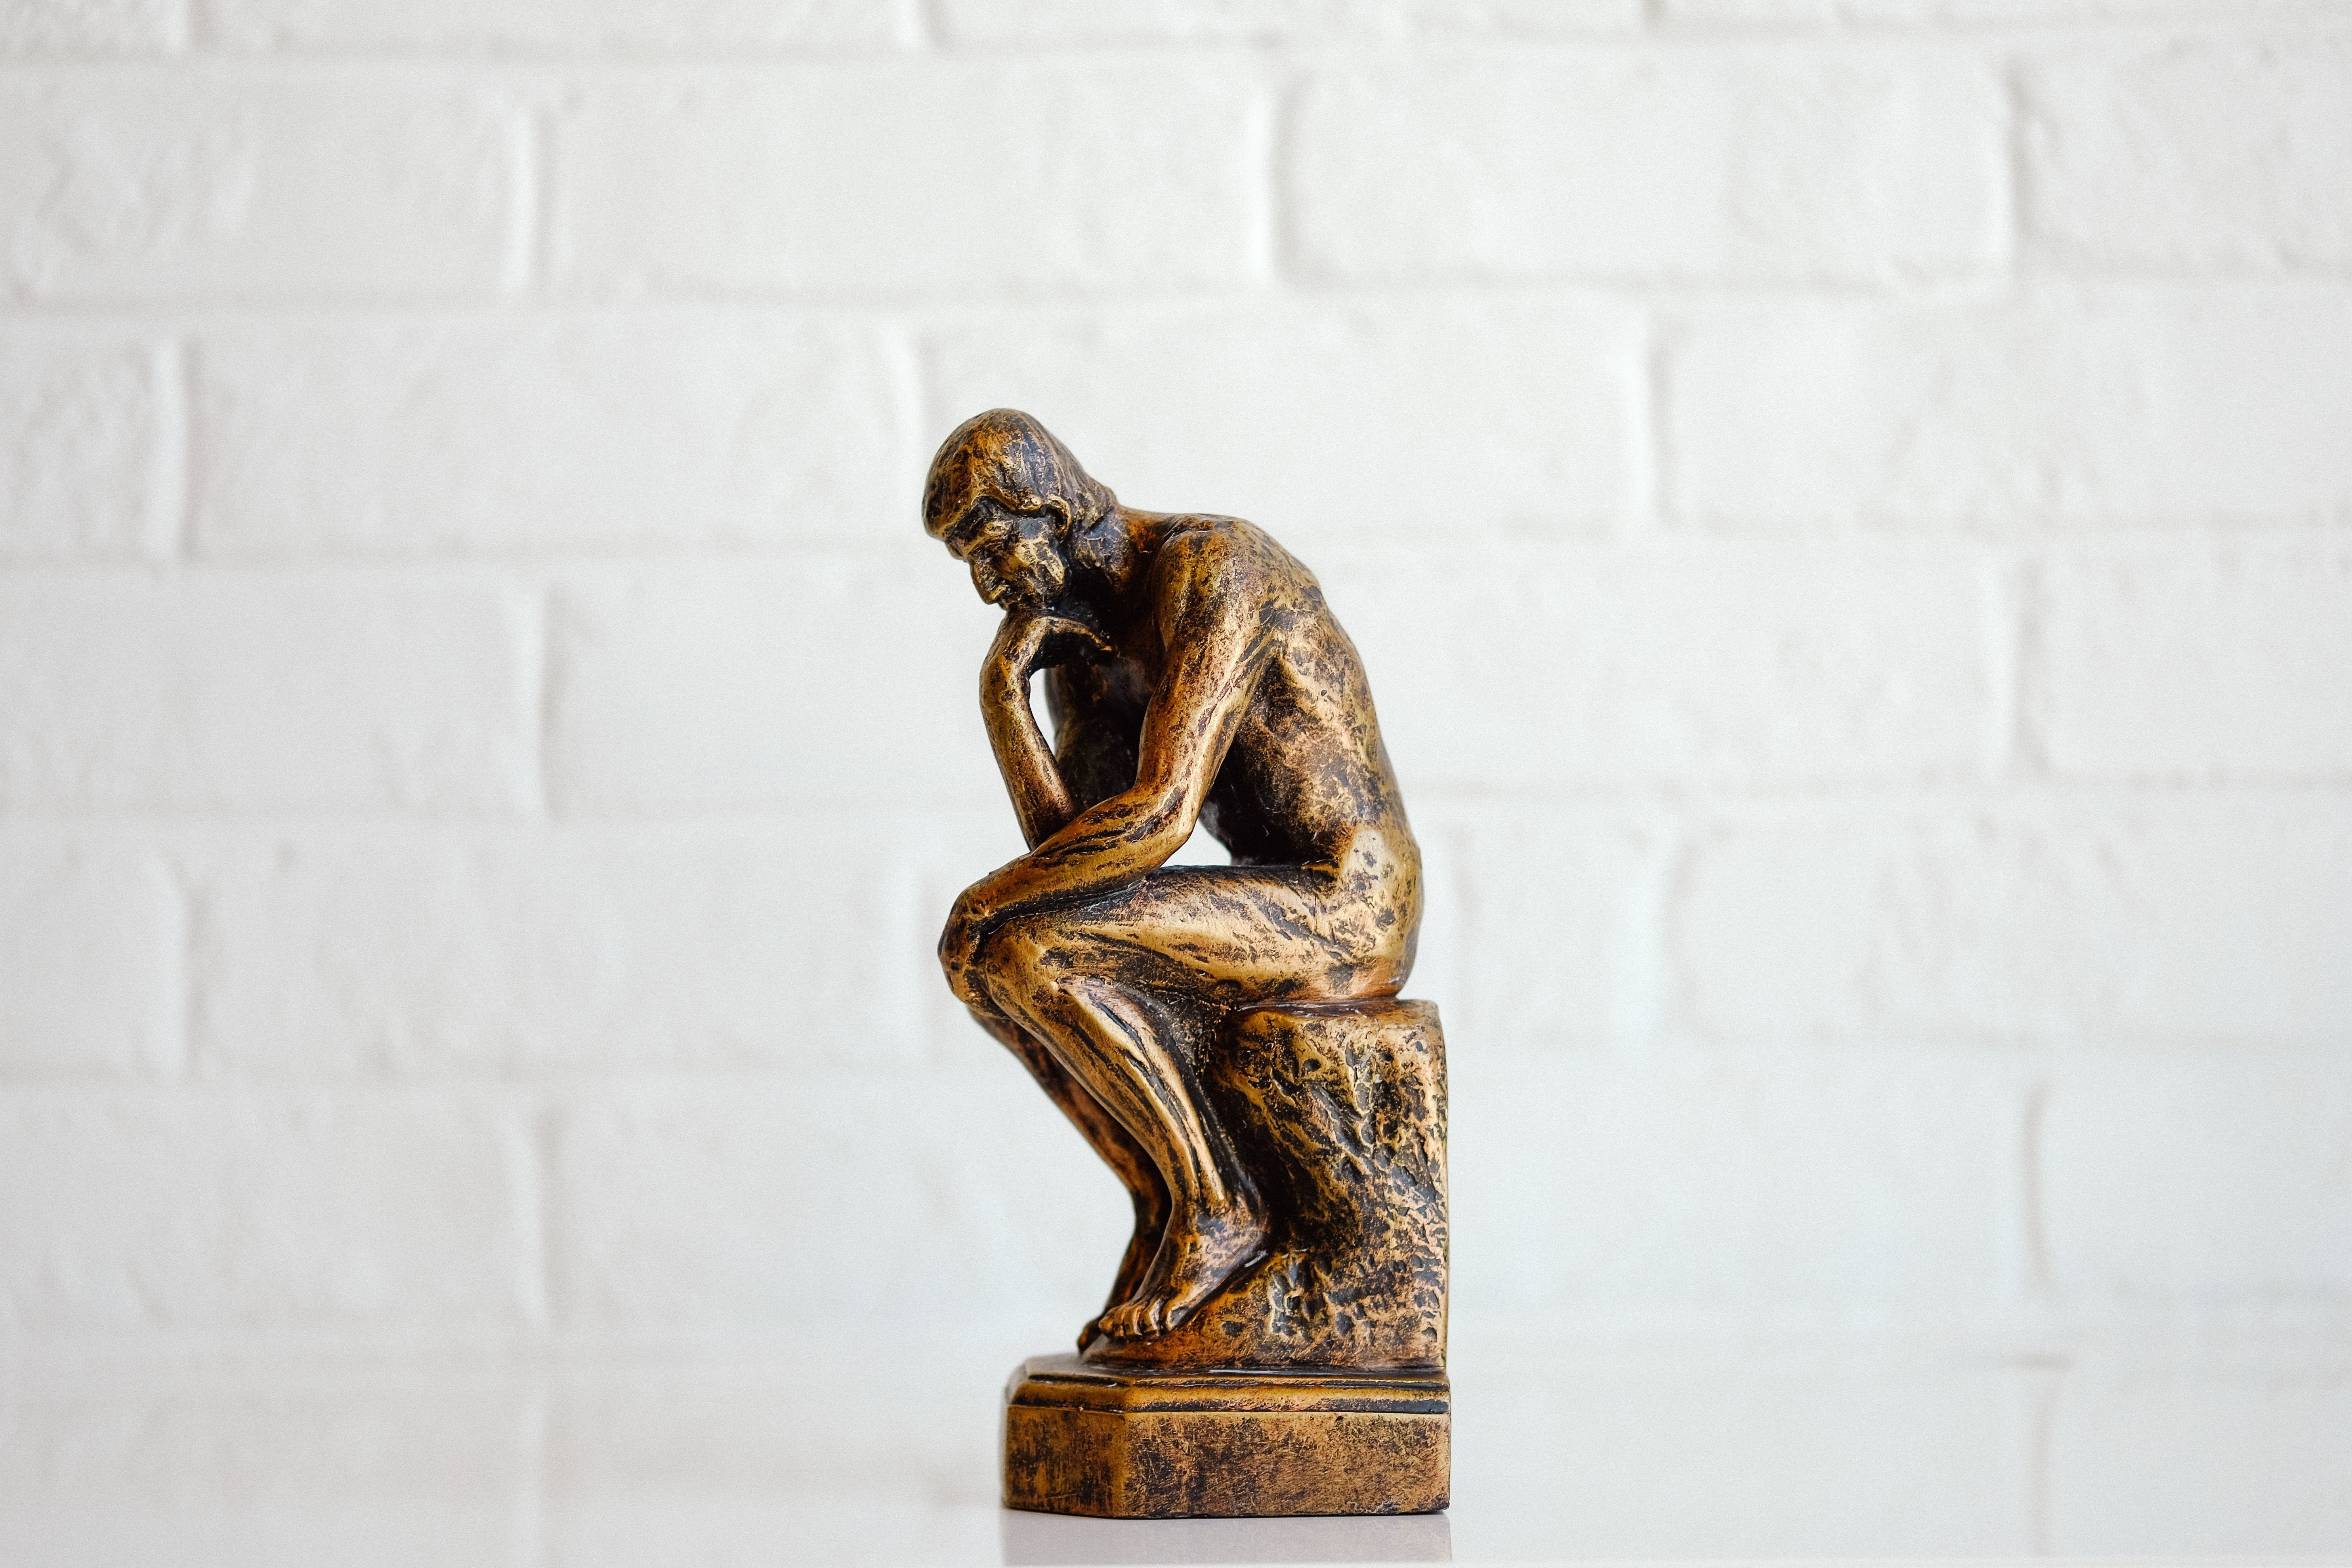 Responsible AI: The Thinker  